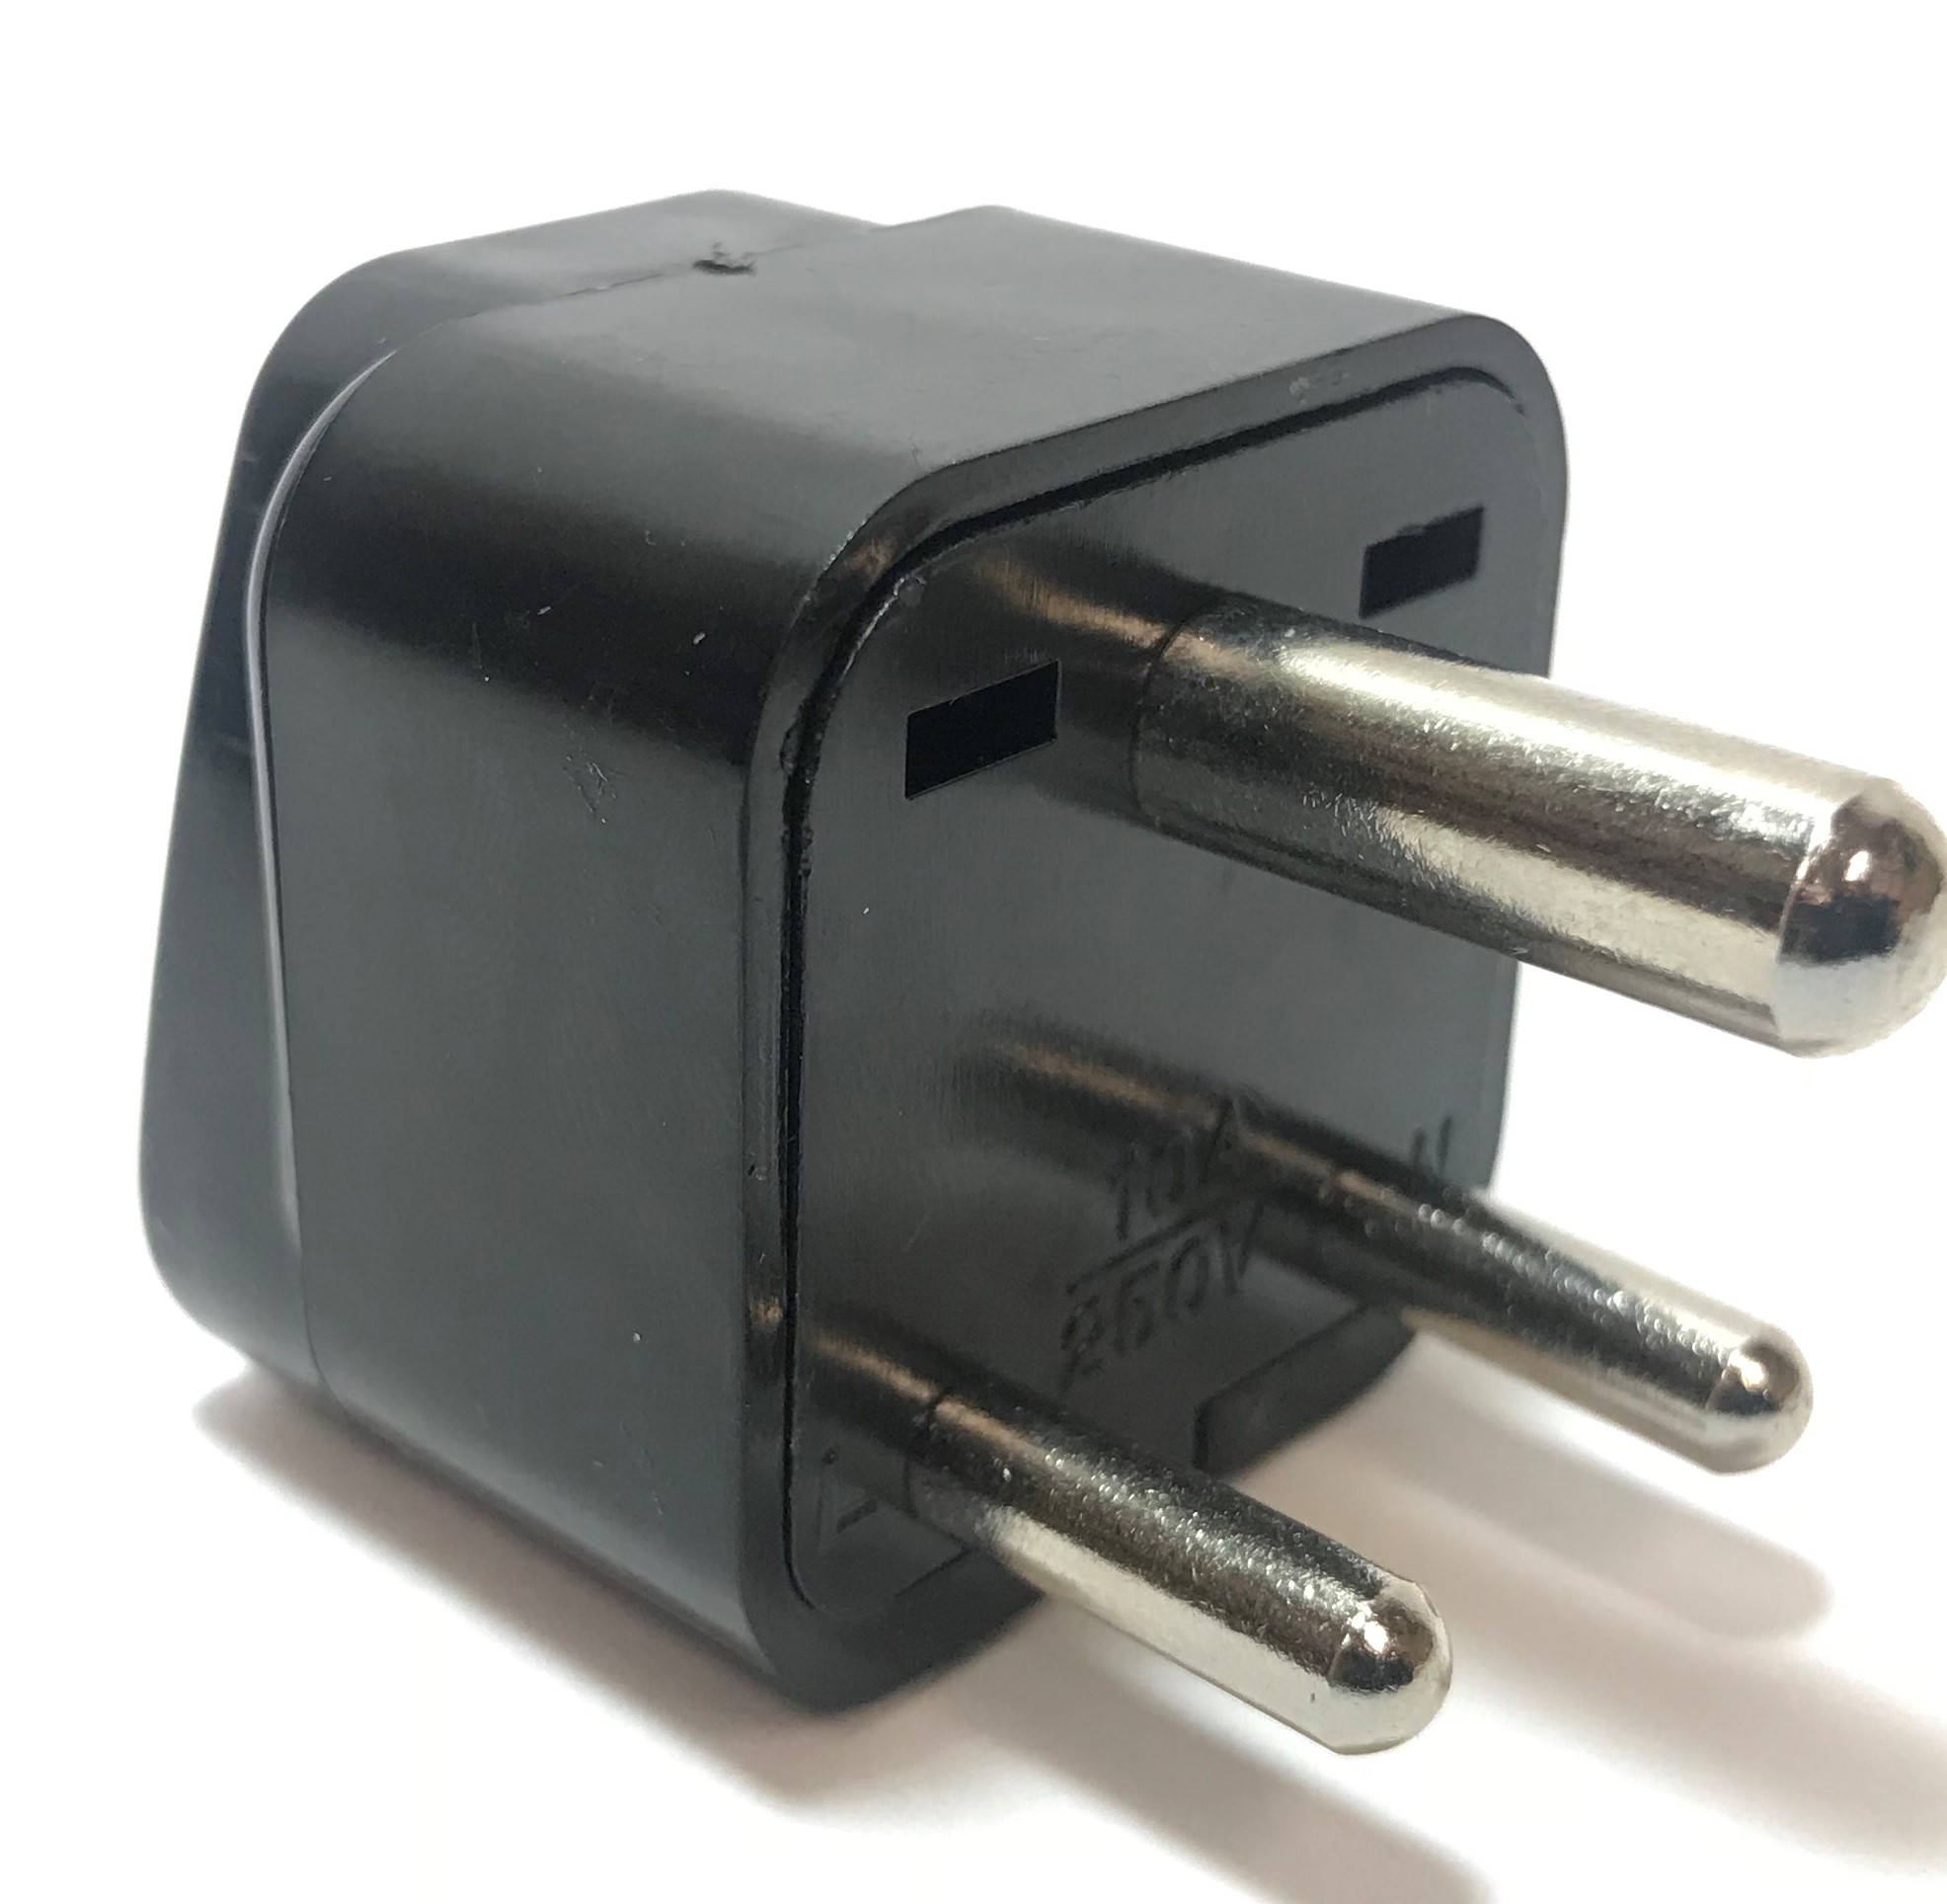 Seven Star SS415 Black India 3-Pin Universal Plug Adapter Type D plug adapter for India, India plugs, indian adapter plug, type D india plug adapters, adaptor, seven star ss415, indian style plug socket, indian universal plug, india round pin adapters, three pin,3 pin,2 prong, europe, asia, africa, india, uk, universal adapters,220 plug,220v adapter,220 volt adapter,220 adaptor